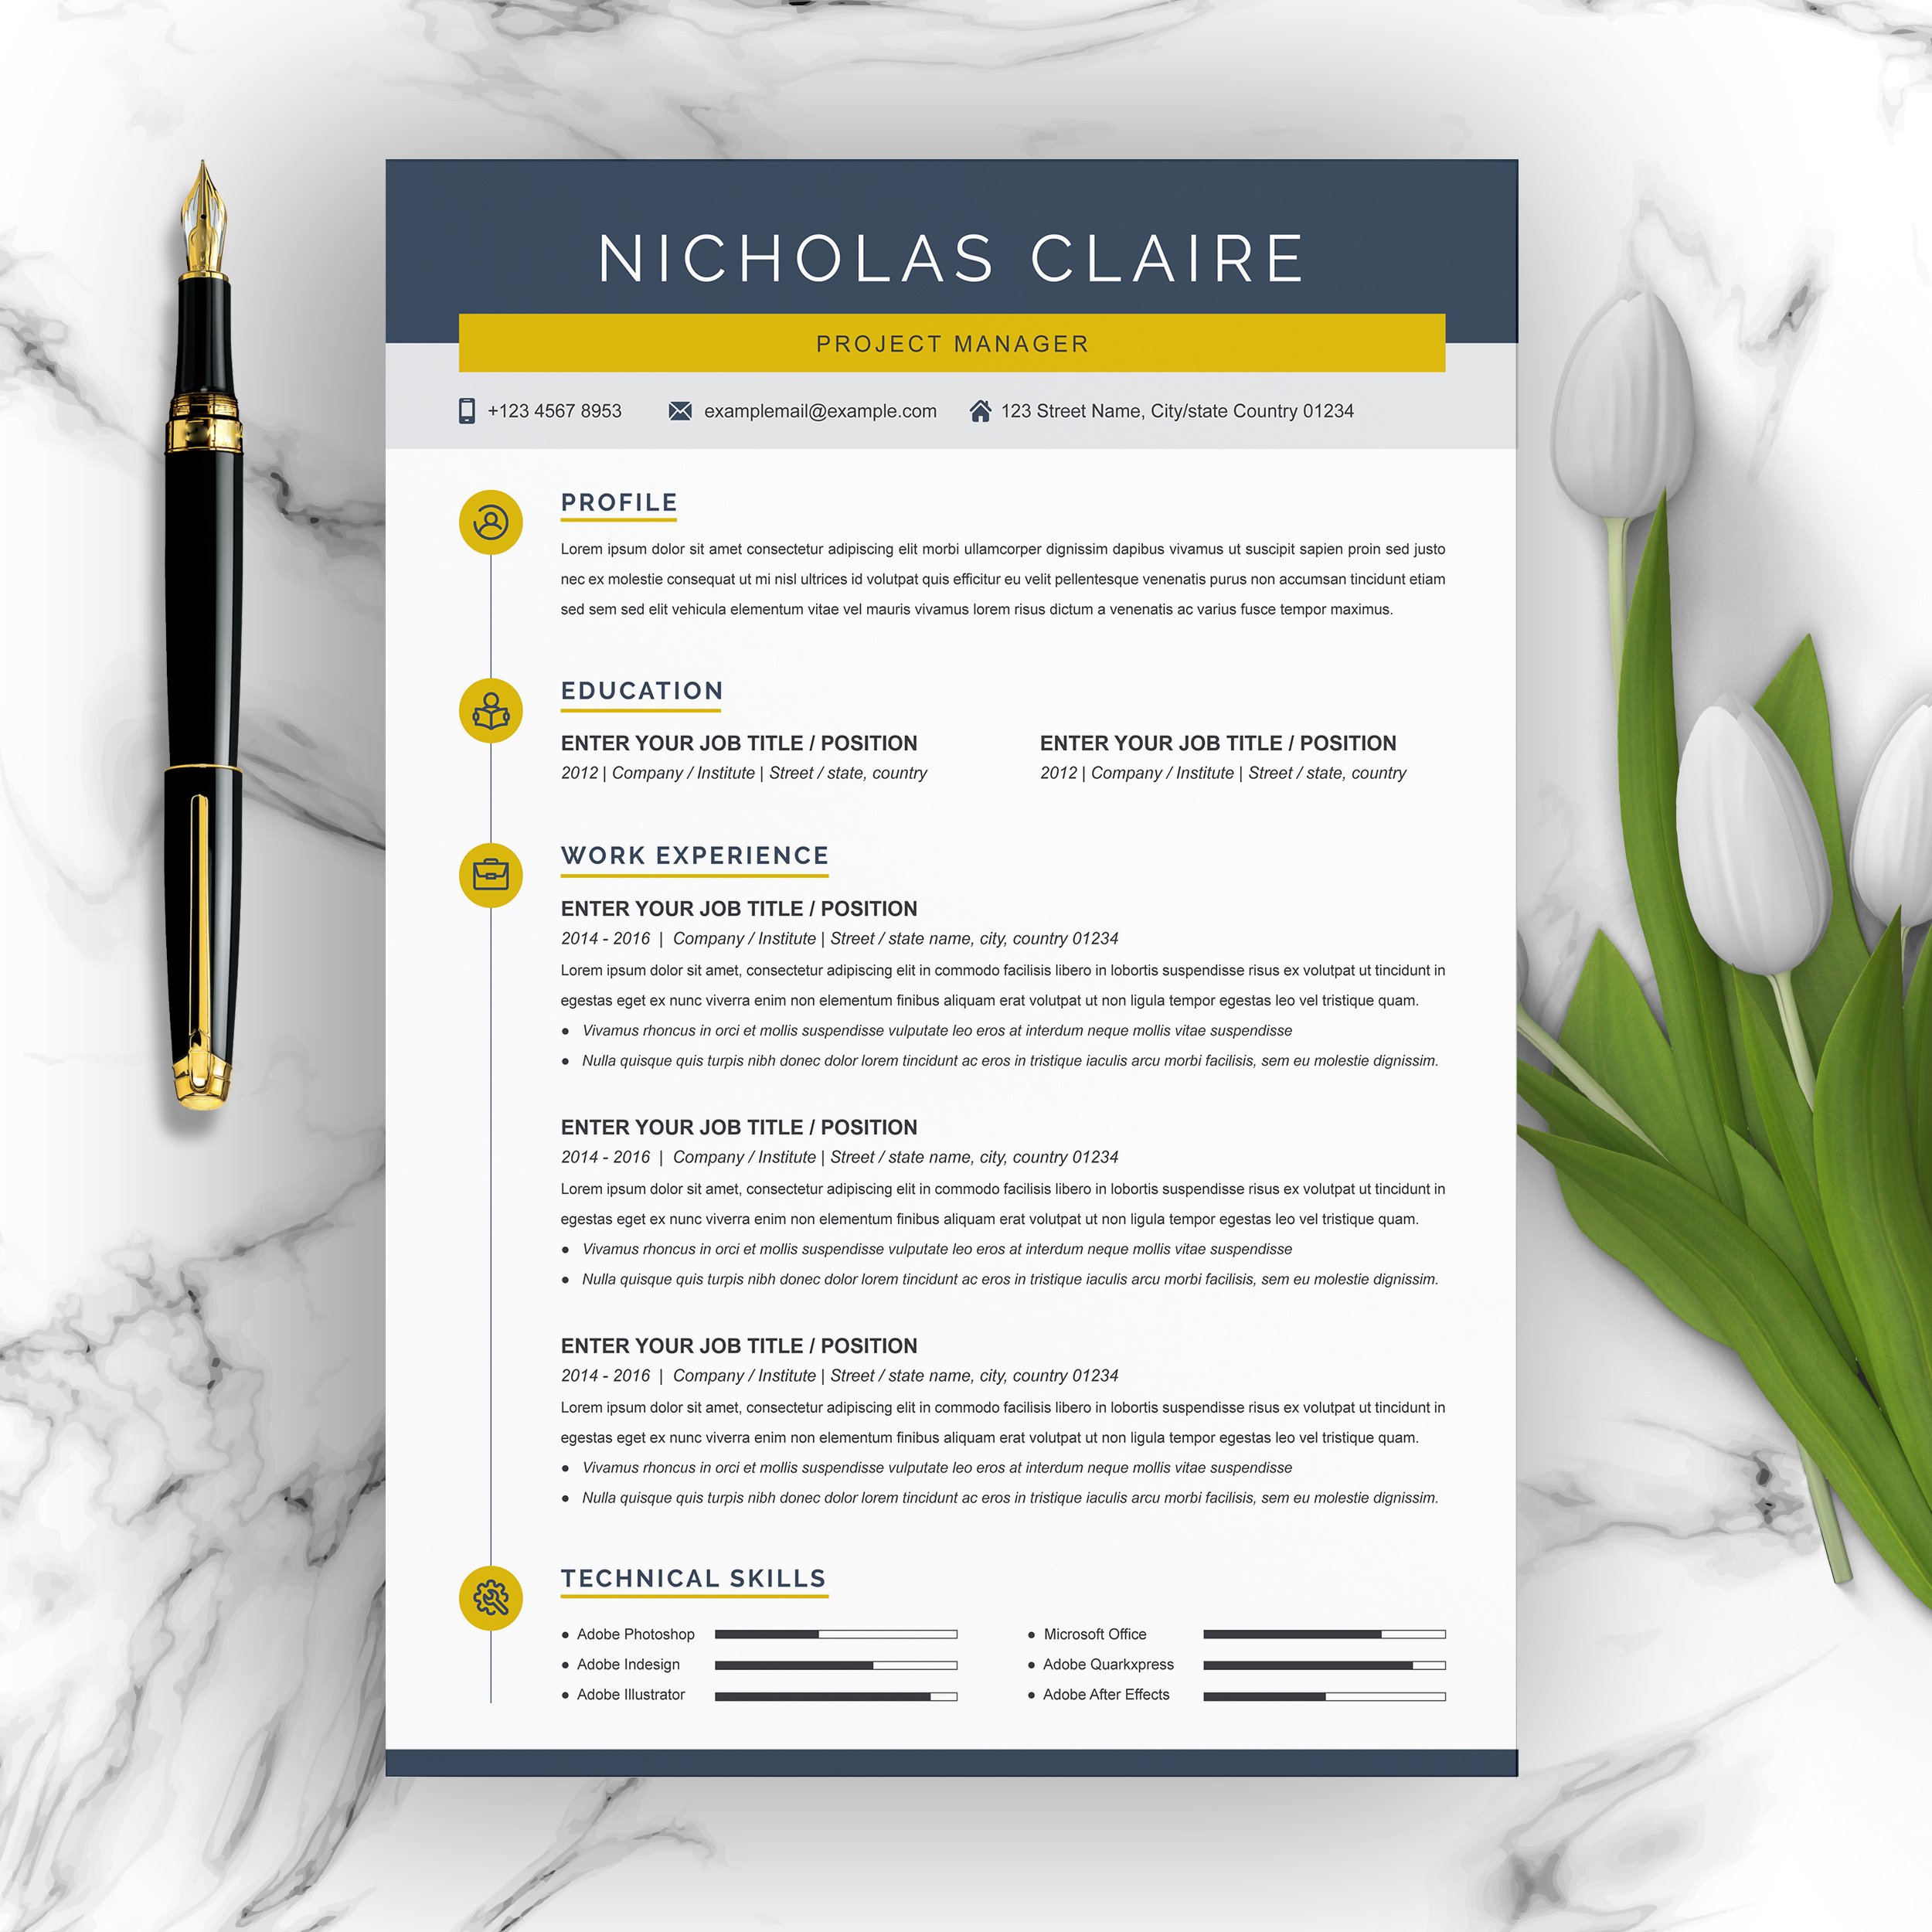 Project Manager Resume/CV Template cover image.